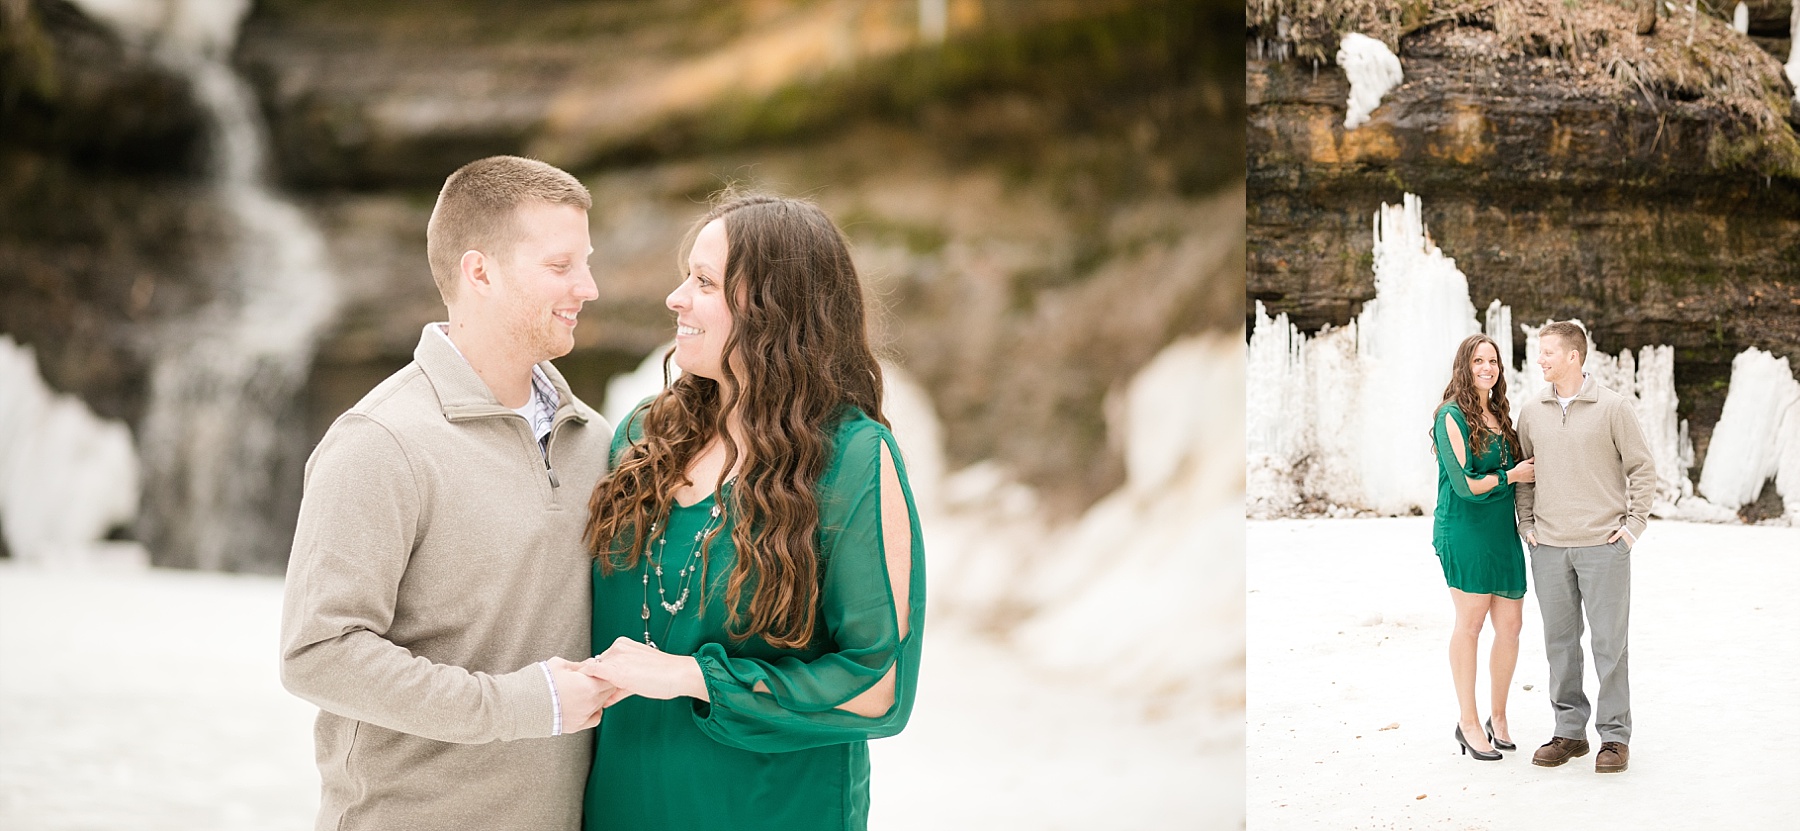 Ice hanging from the rock formations at Devils Punchbowl in Menomonie made for a great setting for Marie & Austin's engagement photos.